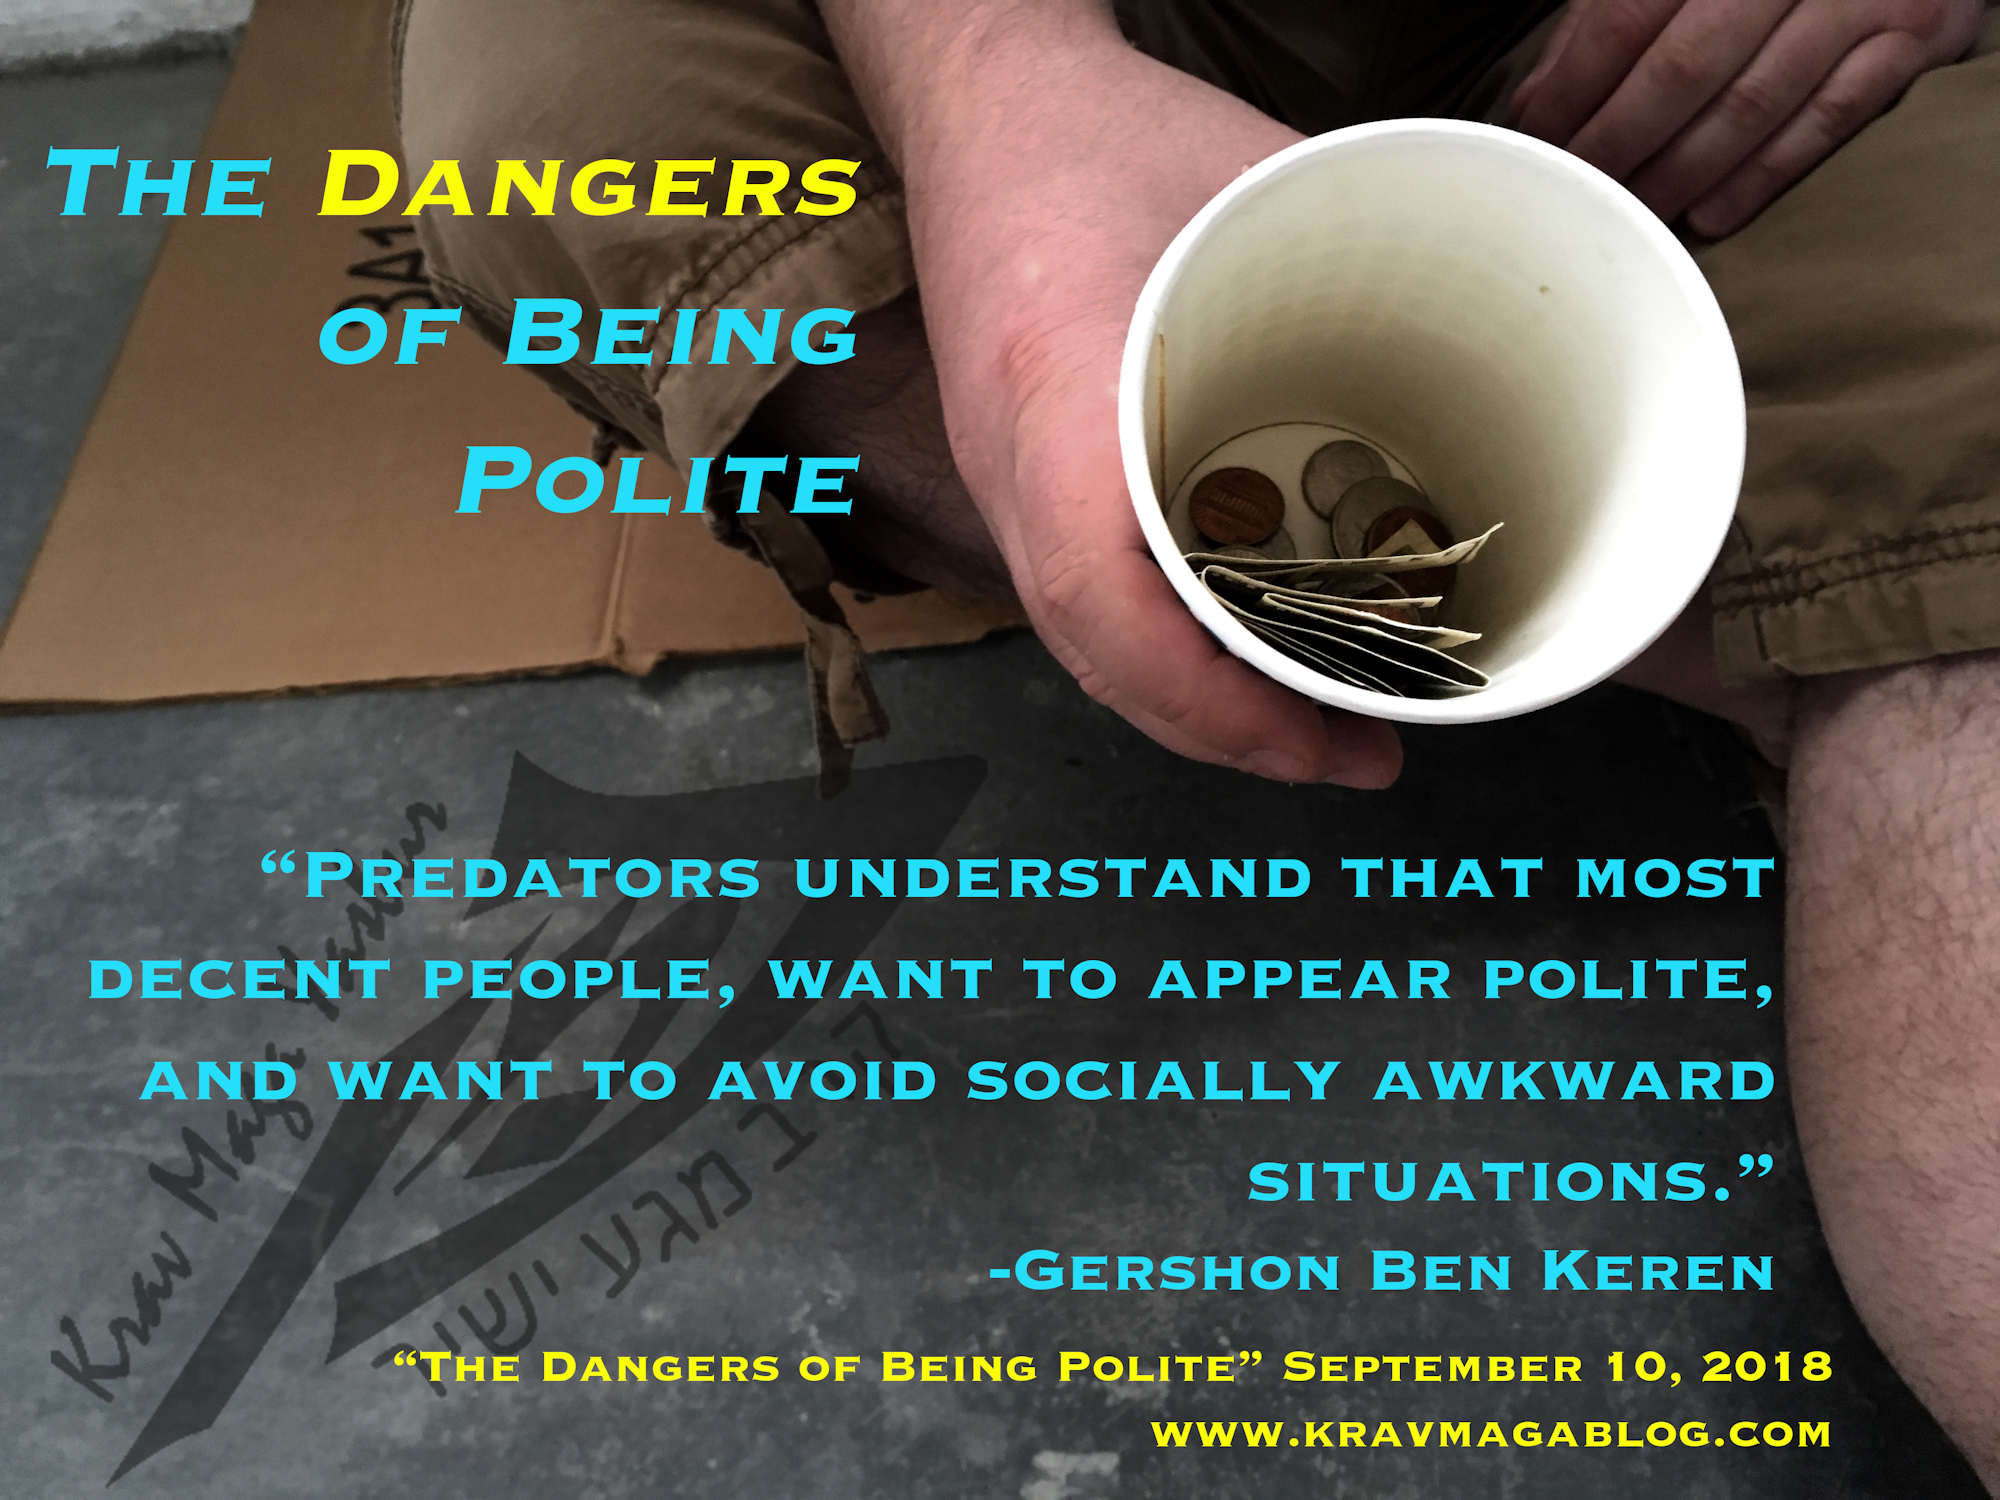 Blog About The Dangers Of Being Polite